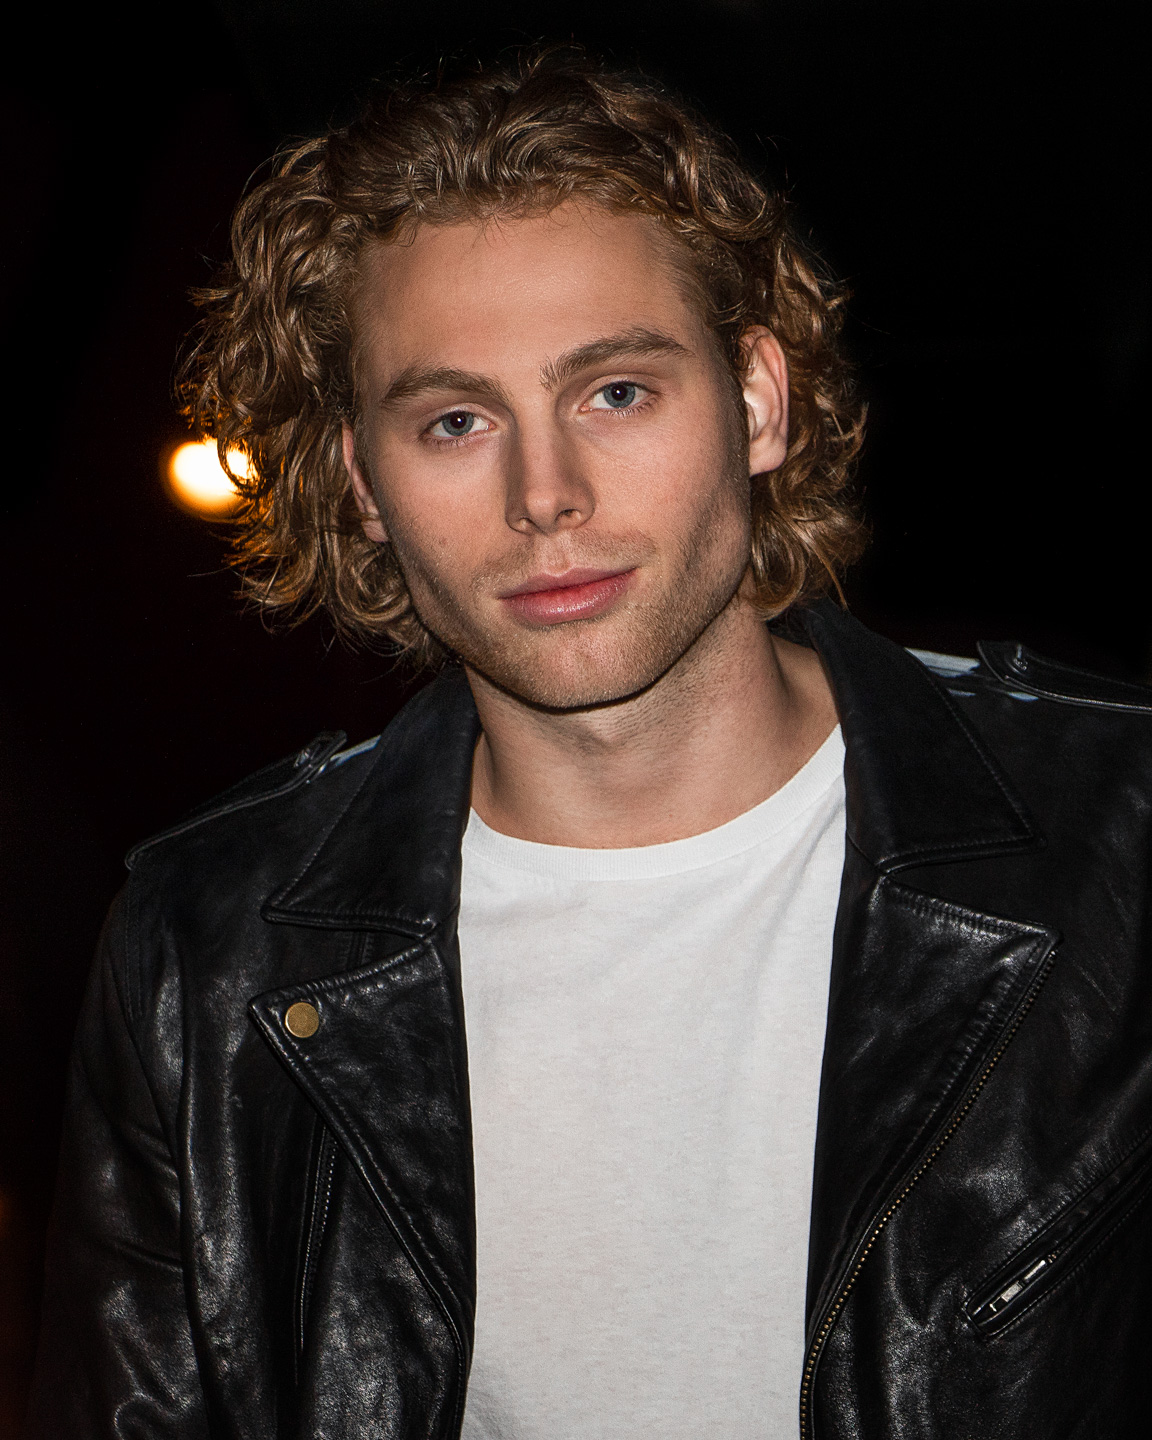 French Photographer Portrait Photography 5 Seconds of Summer/ Luke Hemmings